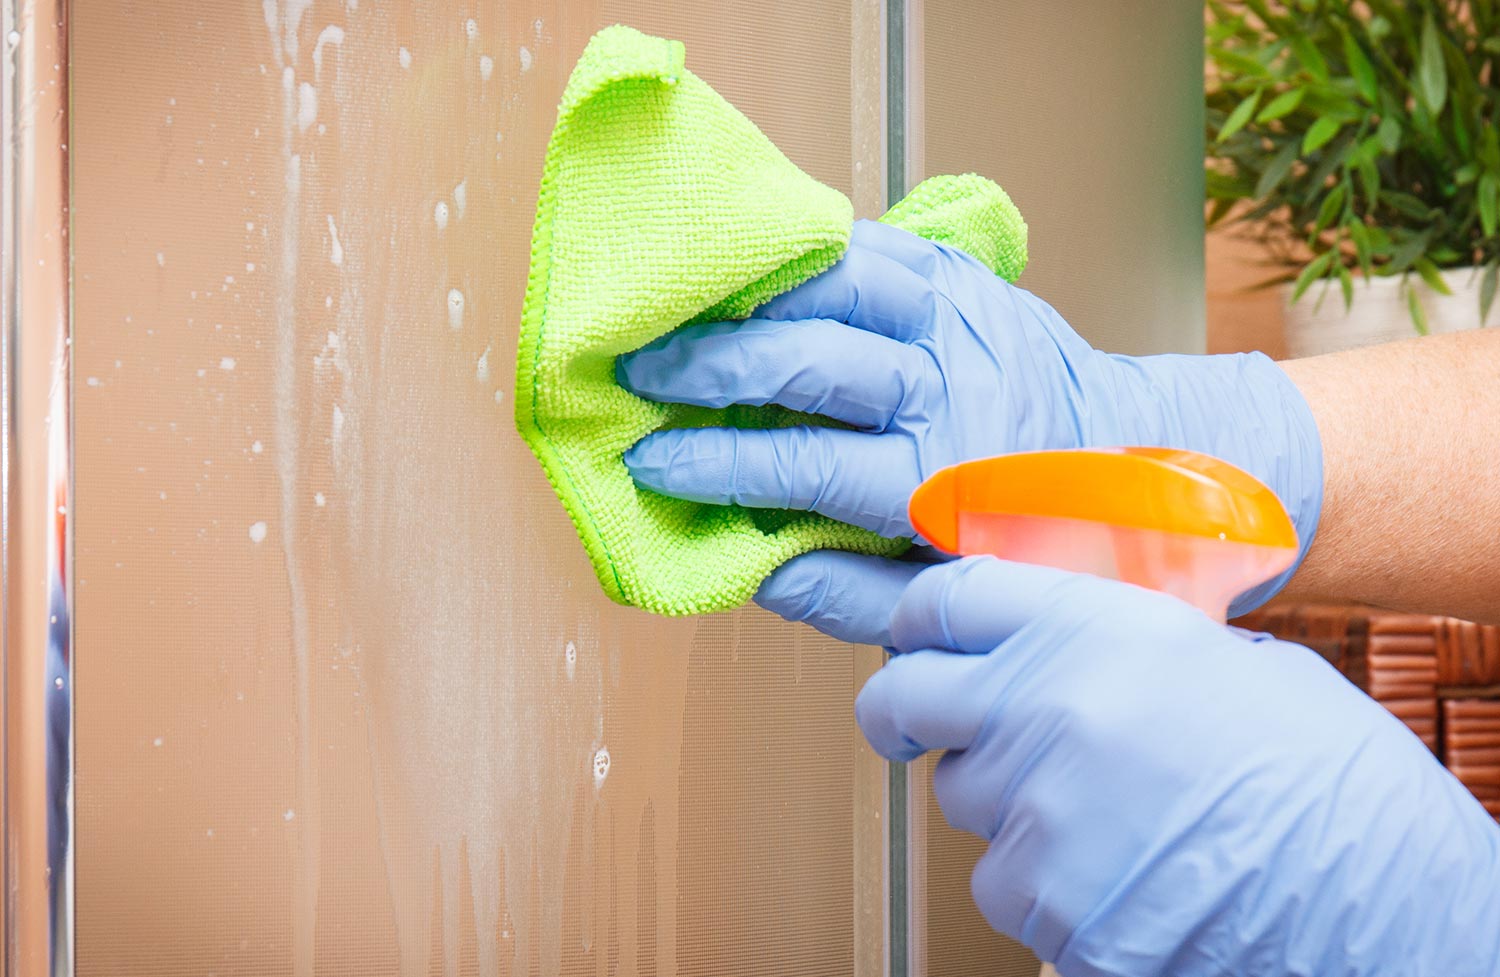 Hand of senior woman in protective gloves cleaning shower using microfiber cloth and detergent